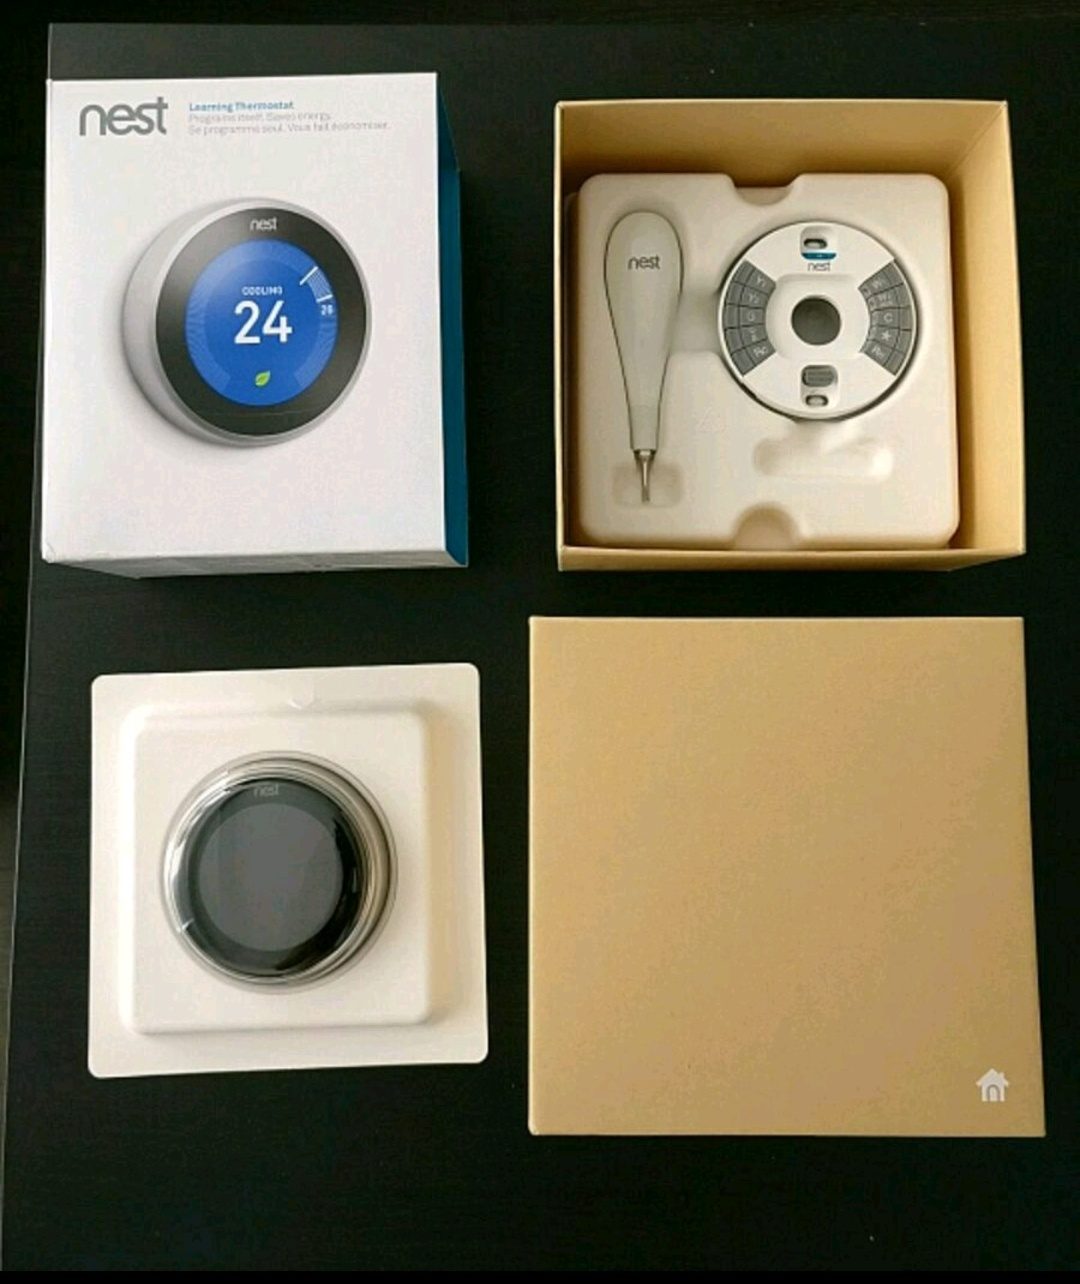 get-a-google-nest-smart-thermostat-for-only-29-99-with-efficiency